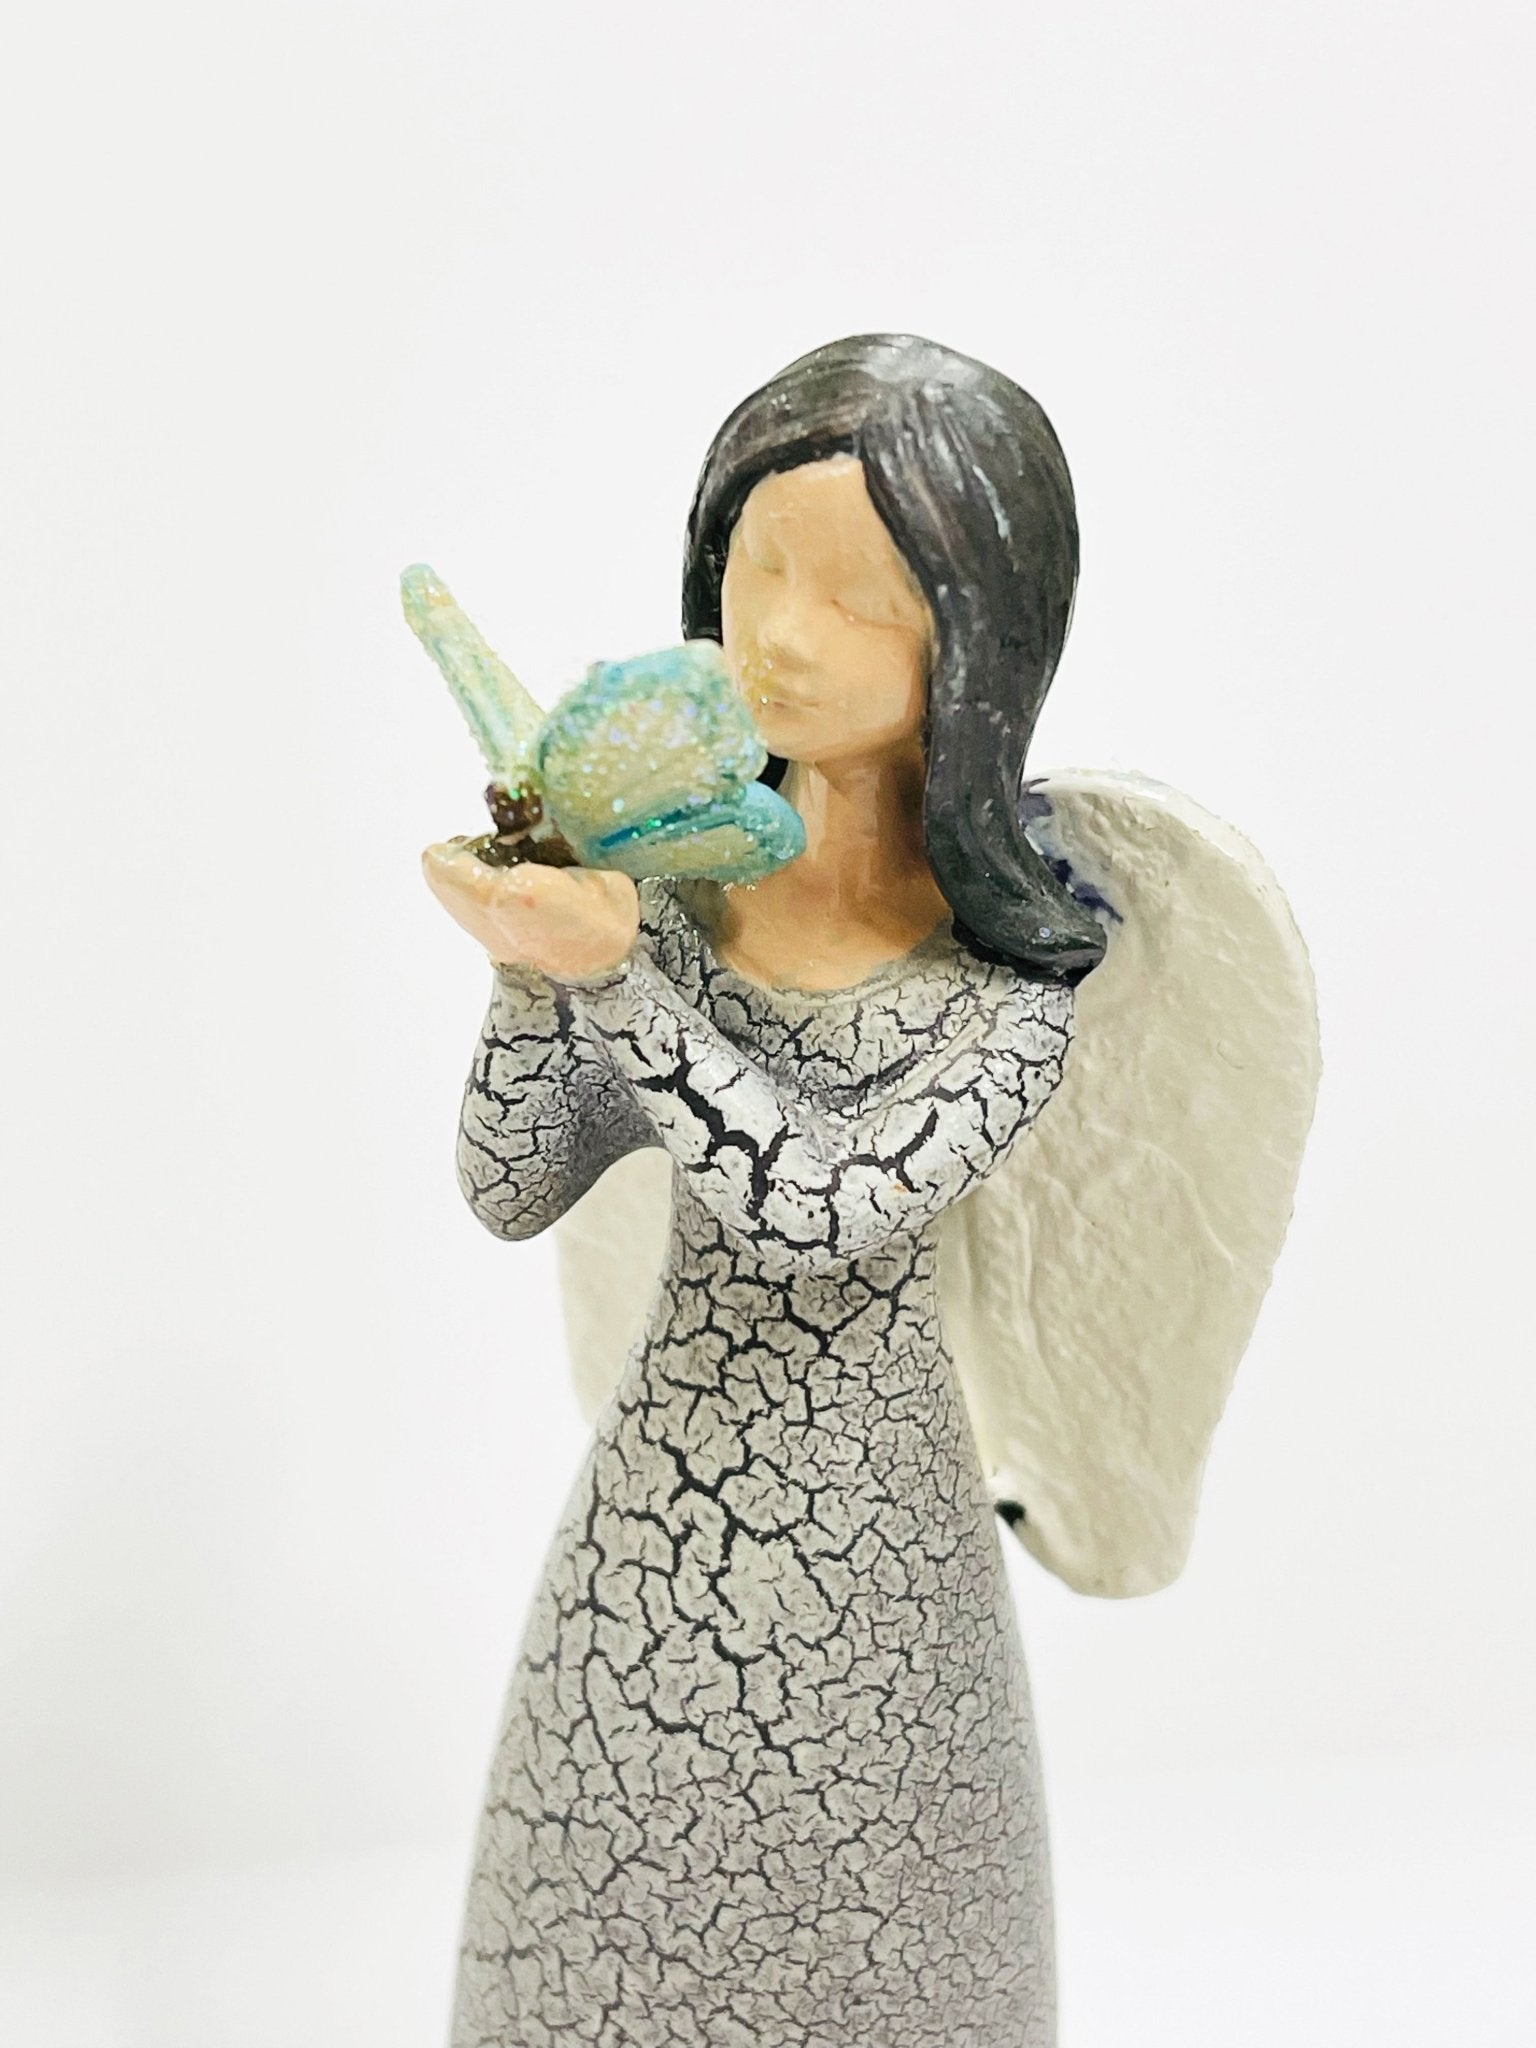 Your Are Special Angel Small Figurine - Celebrate Prints